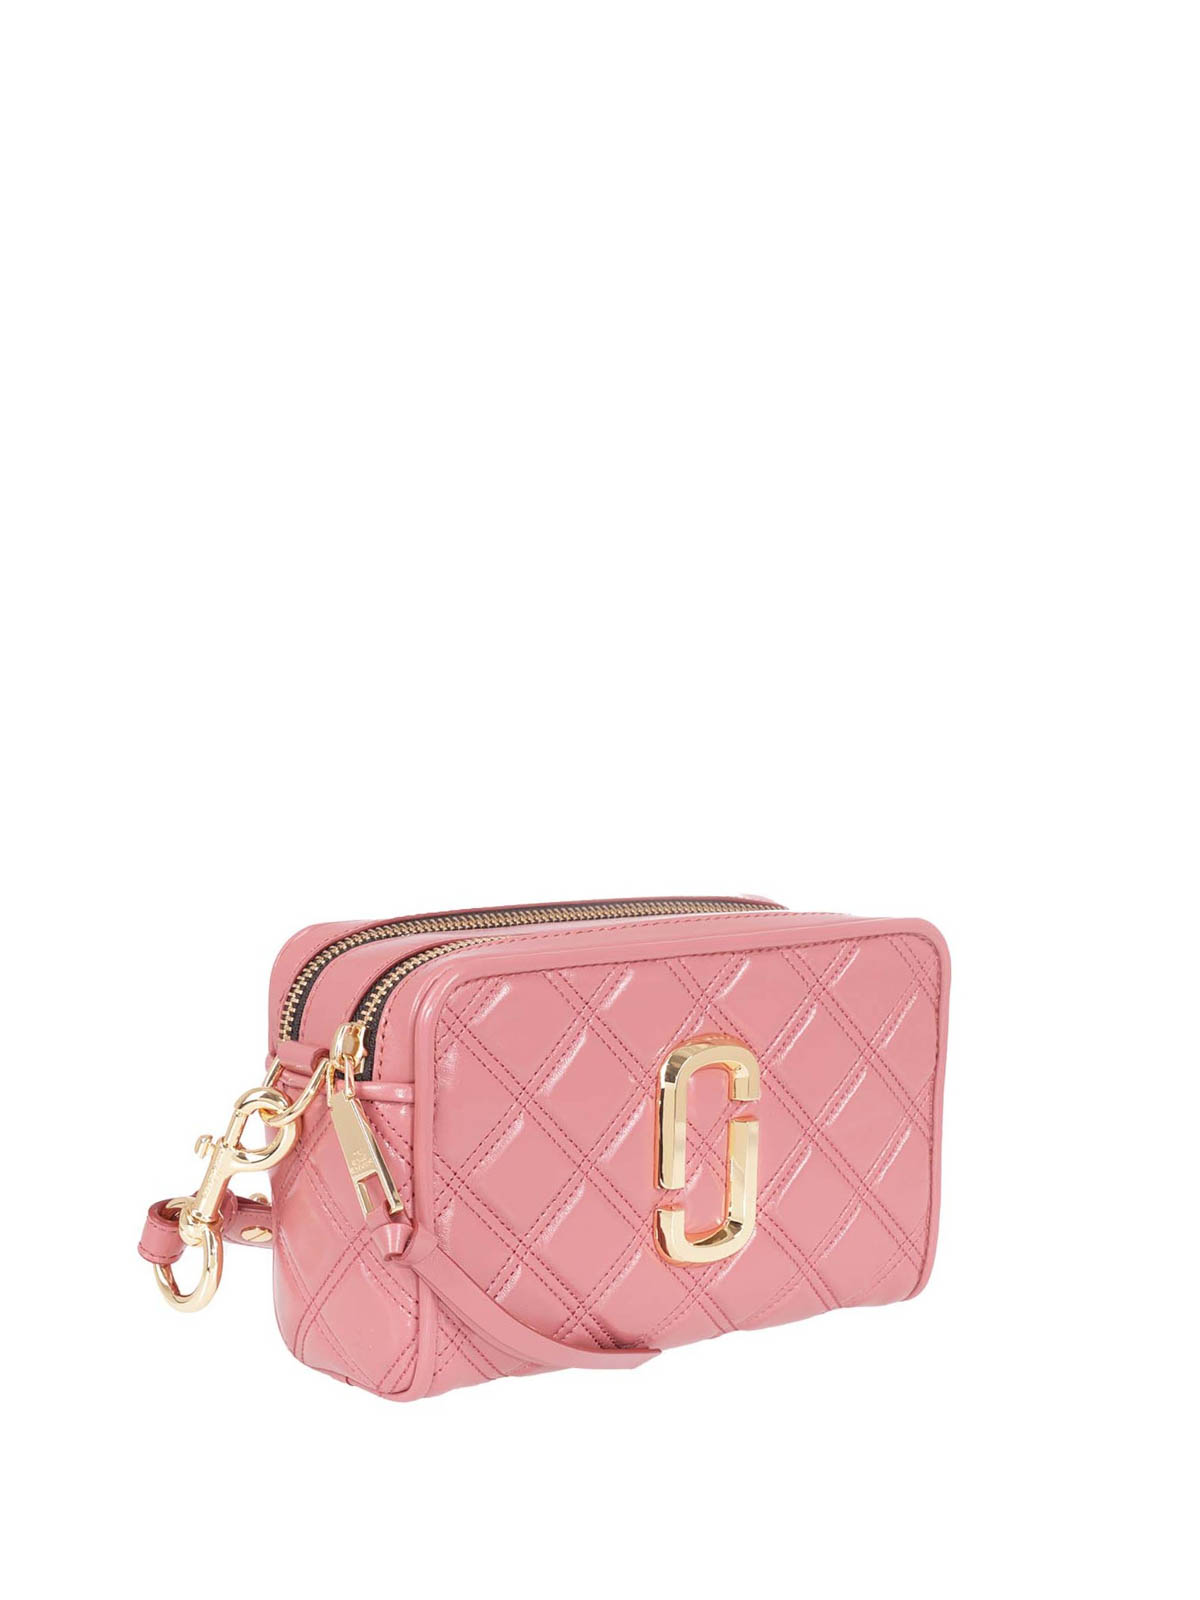 Marc Jacobs The Quilted Softshot 21 Crossbody Bag in Metallic